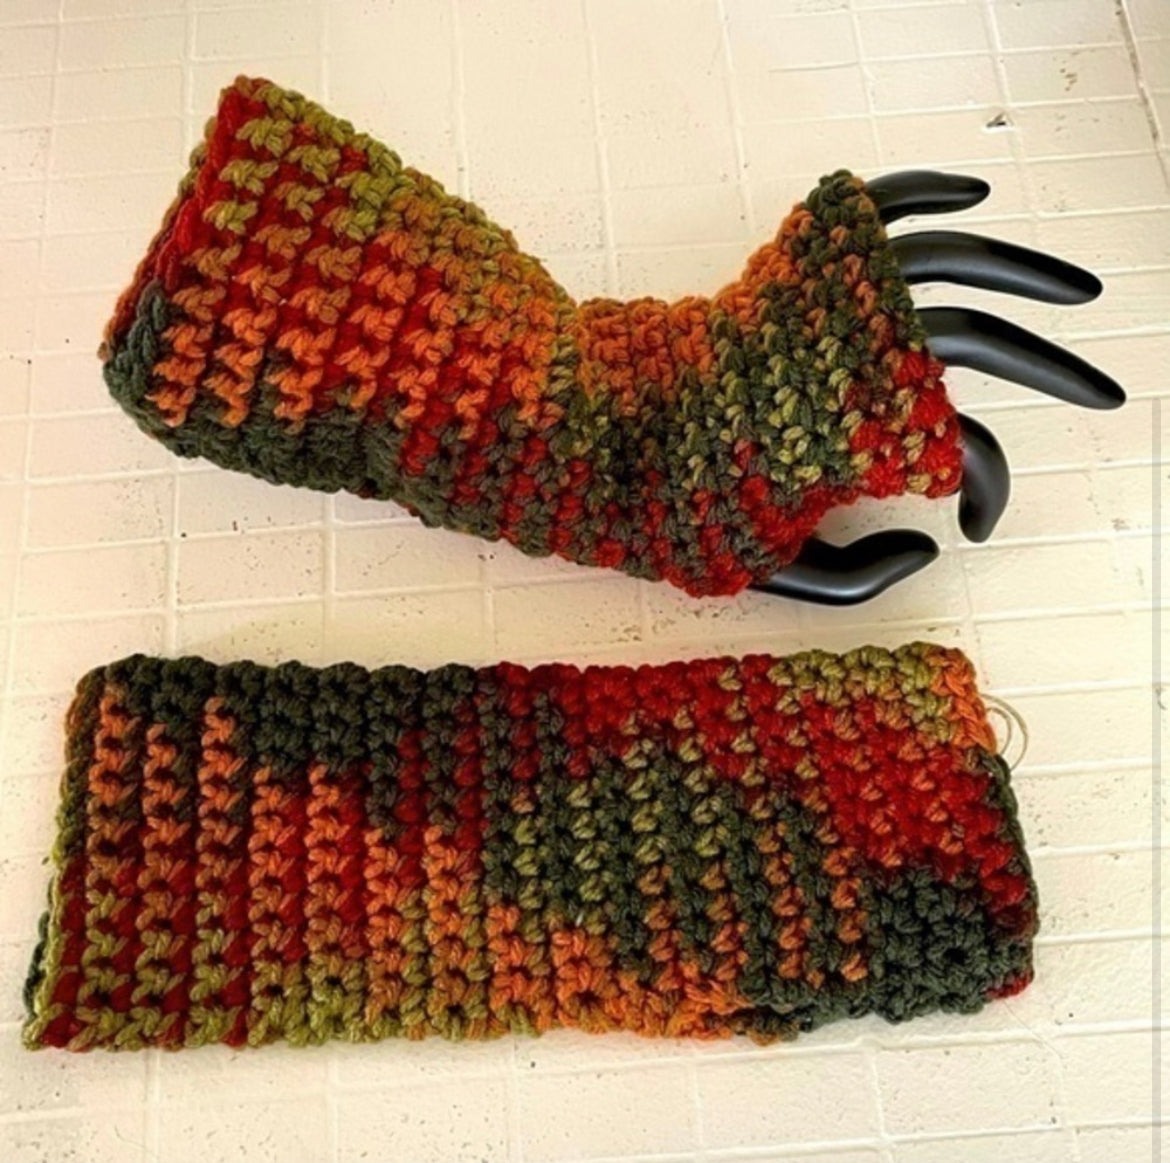 Writing Tech Fingerless Gloves Autumn Whimsy Marbled Orange Brown Green Crochet Knit Fall Winter Gaming Texting Wrist Warmers